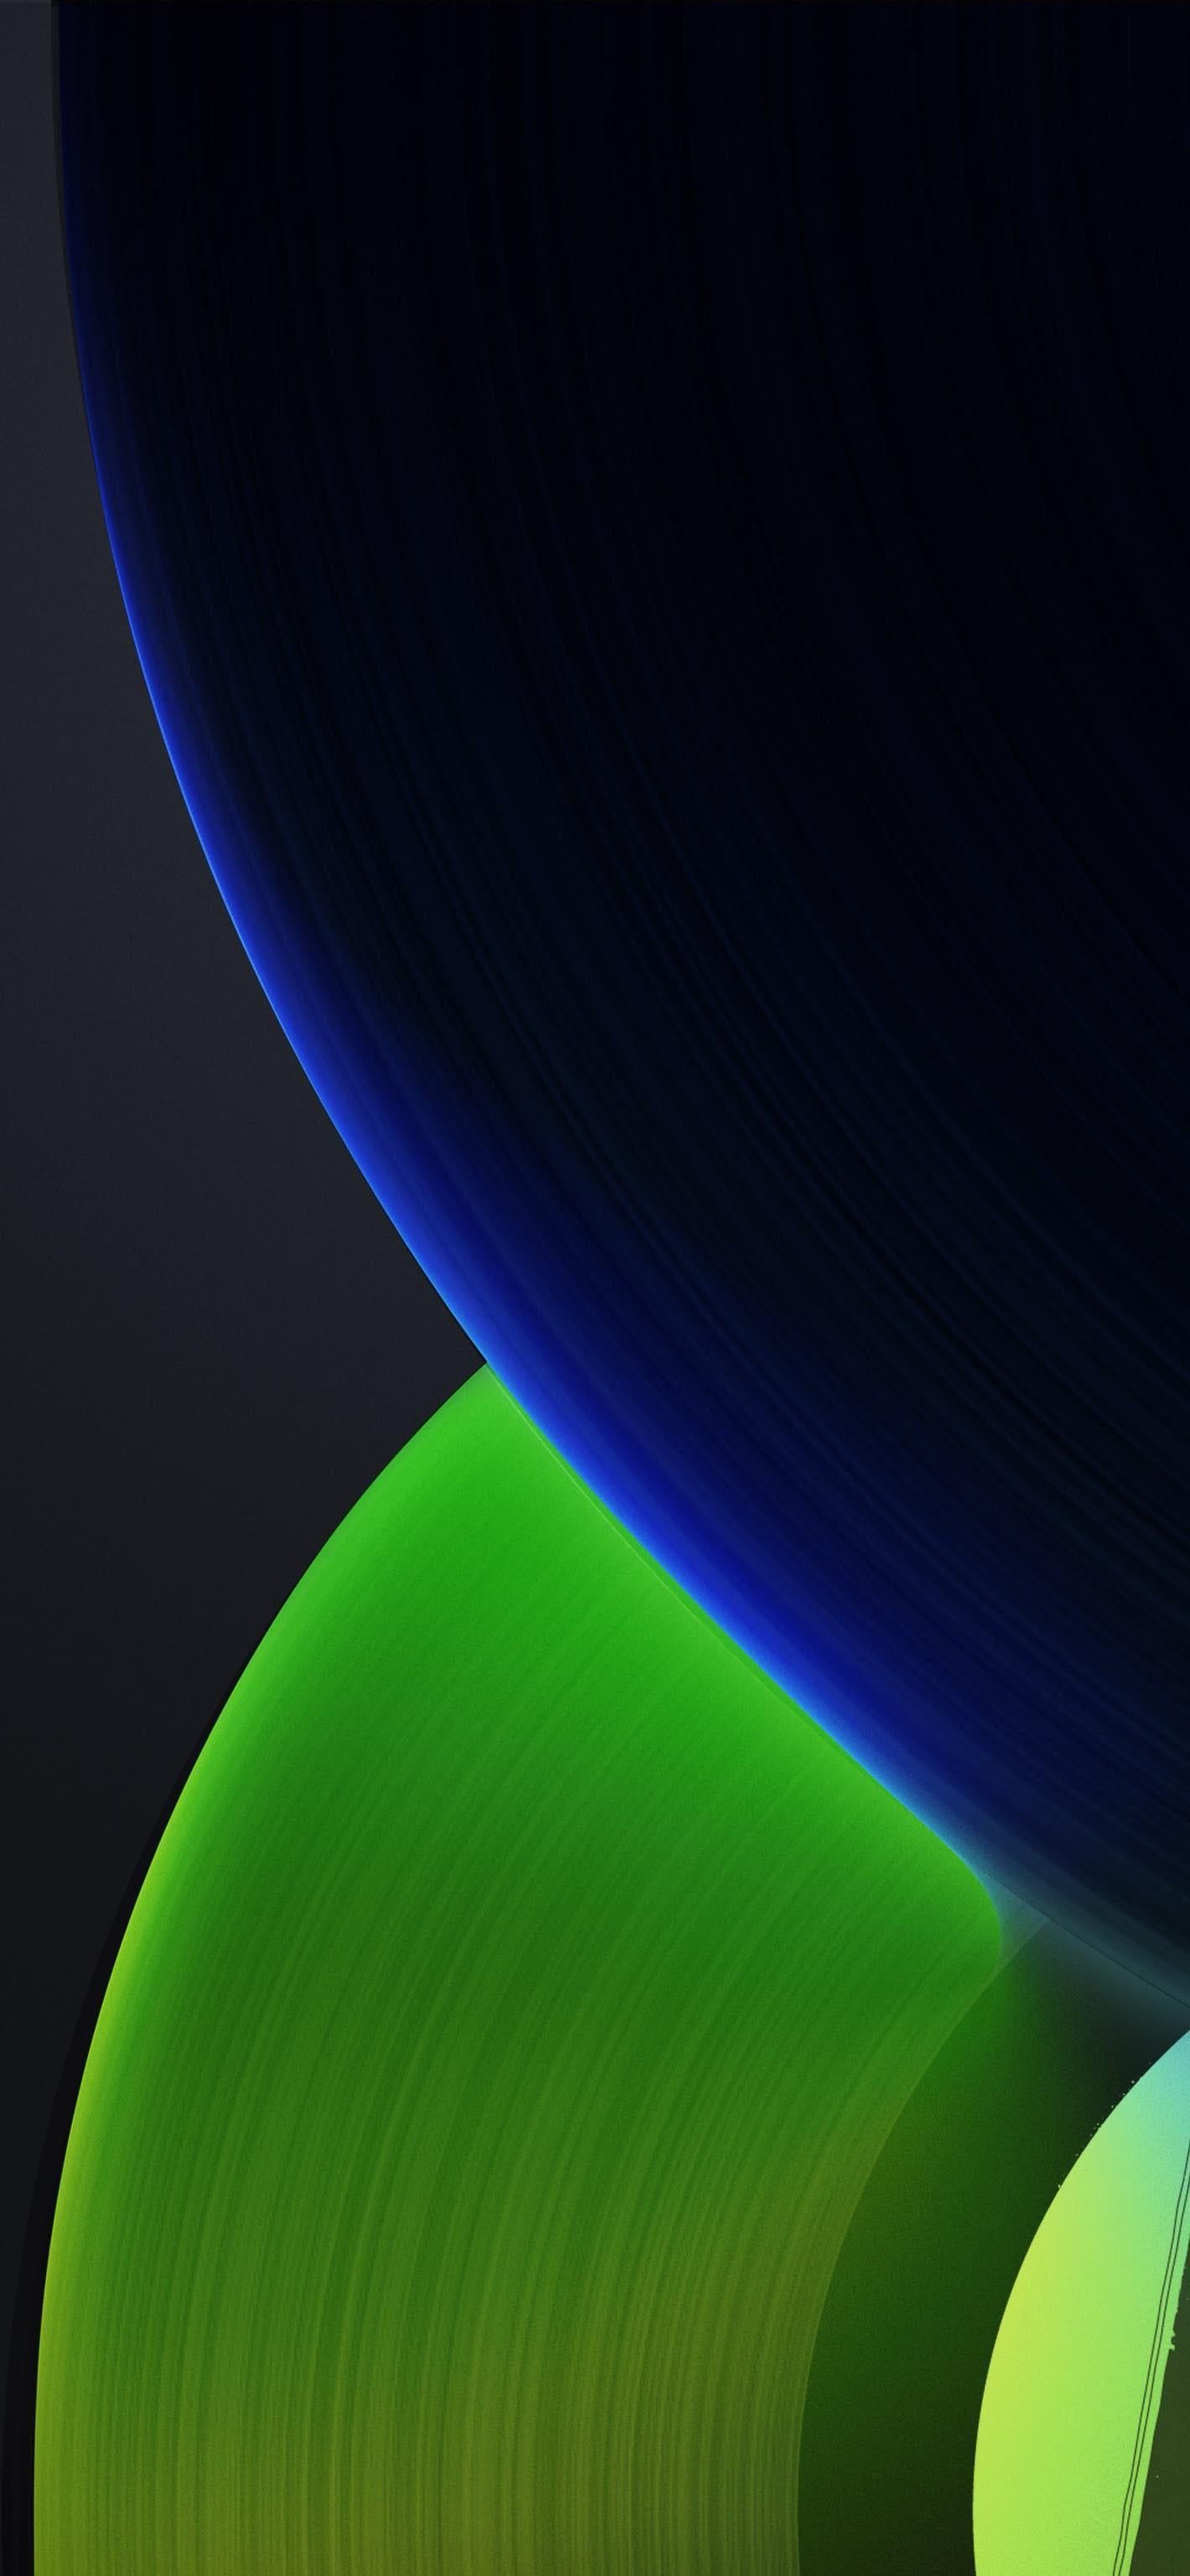 Some iOS 14 and Vinyl crossover iPhone wallpapers I made this weekend. : vinyl